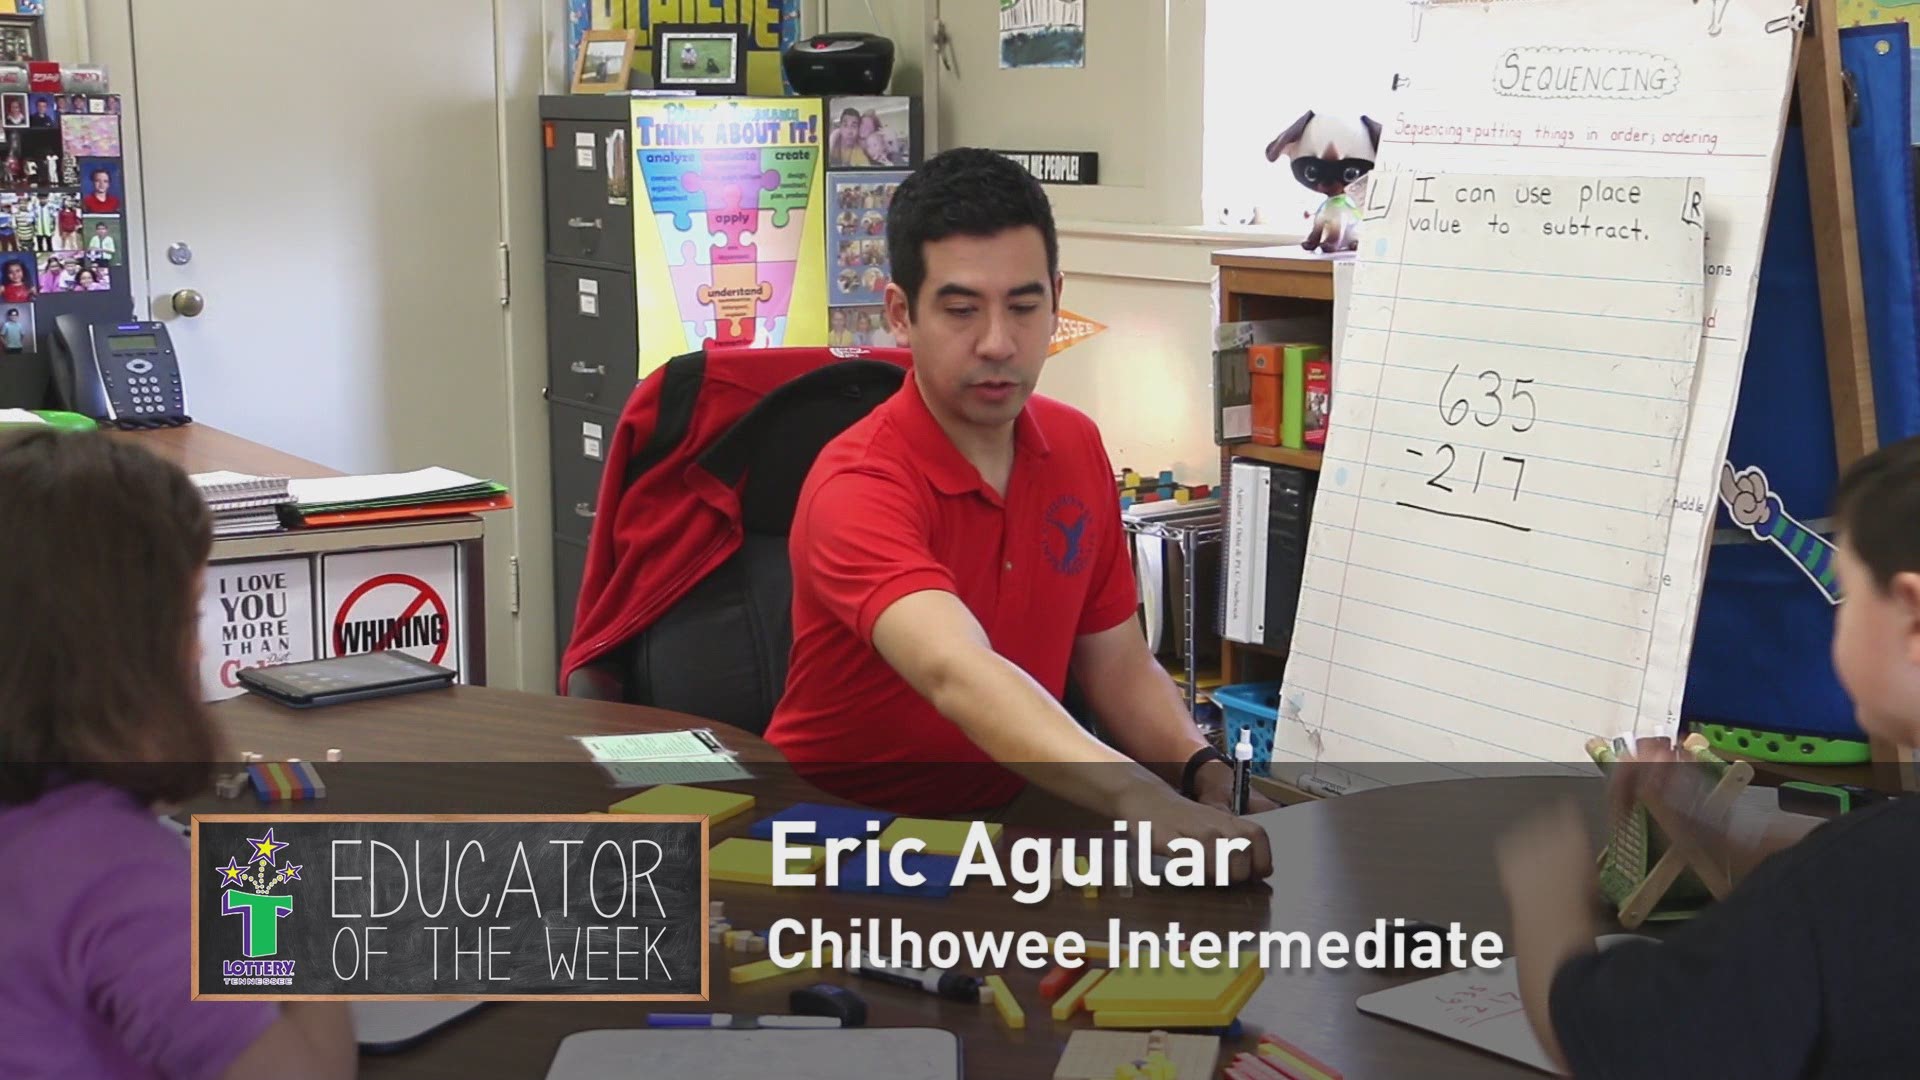 The Educator of the Week 11/14 is Eric Aguilar